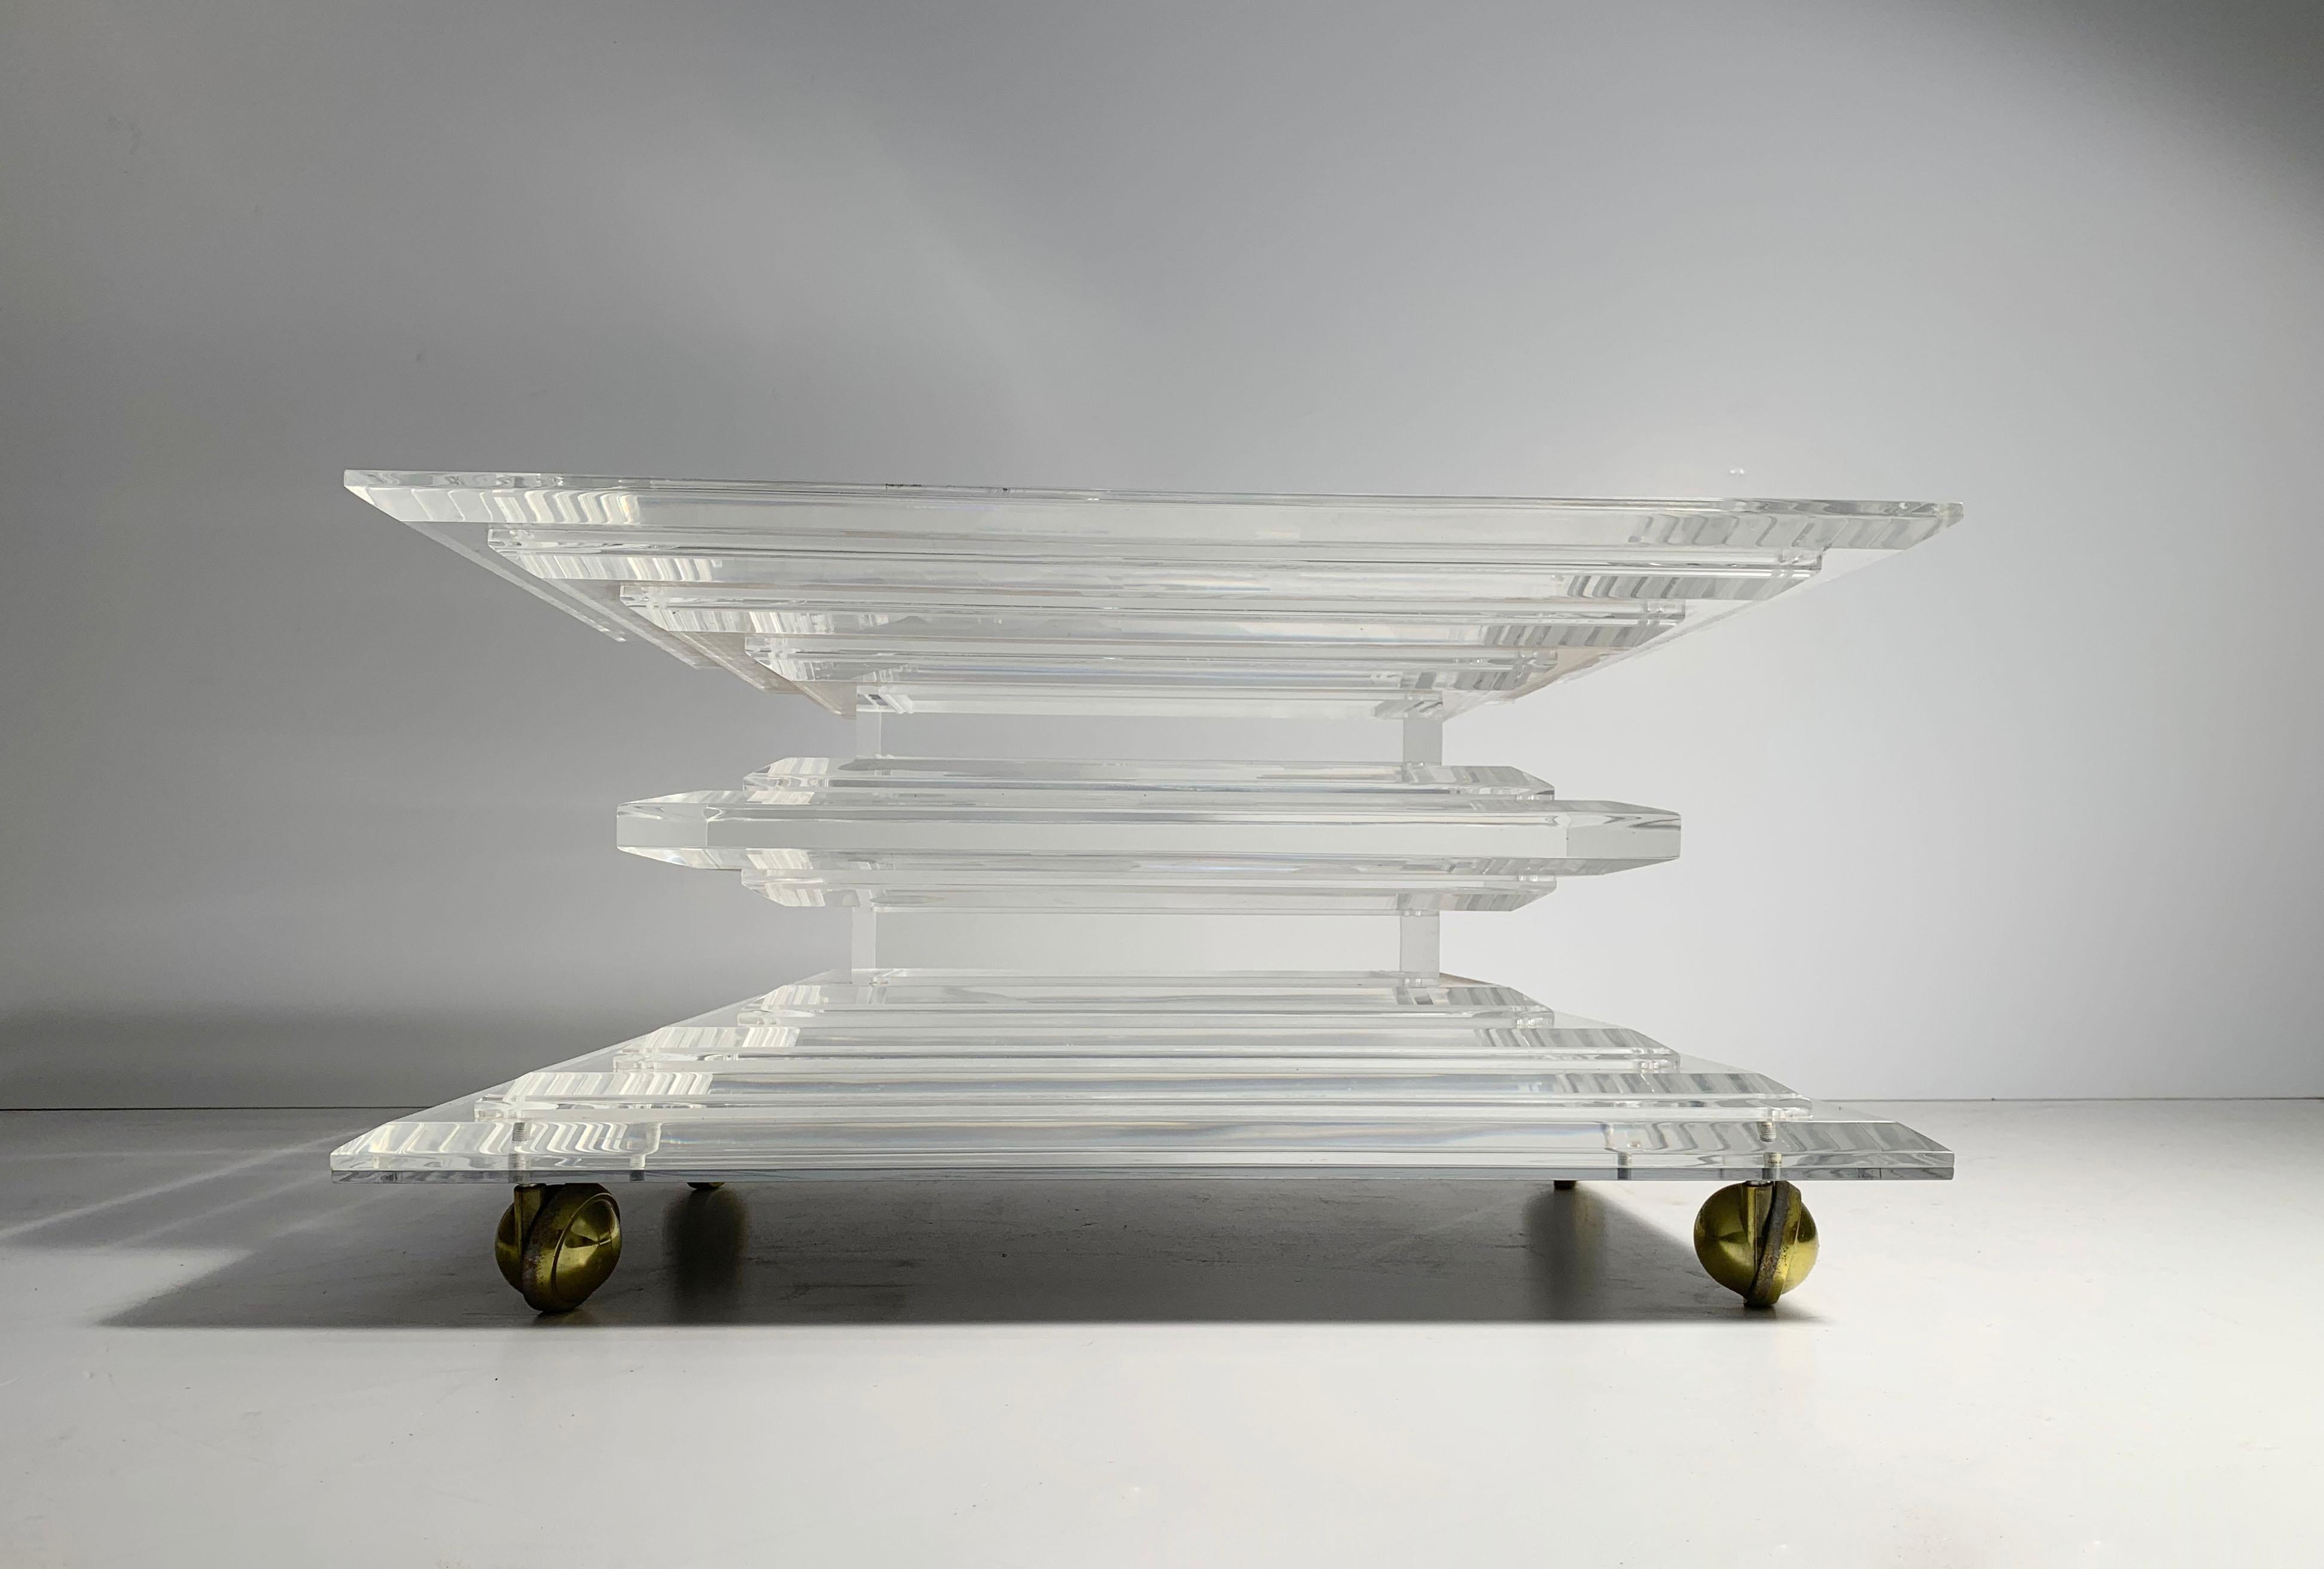 Hollywood Regency Lucite stacked base on castors. Made add a glass top to your design specs for a coffee table. Or, upholster the top for a stellar rolling pouf / stool / bench

Manner of Karl Springer

Size of base is
28